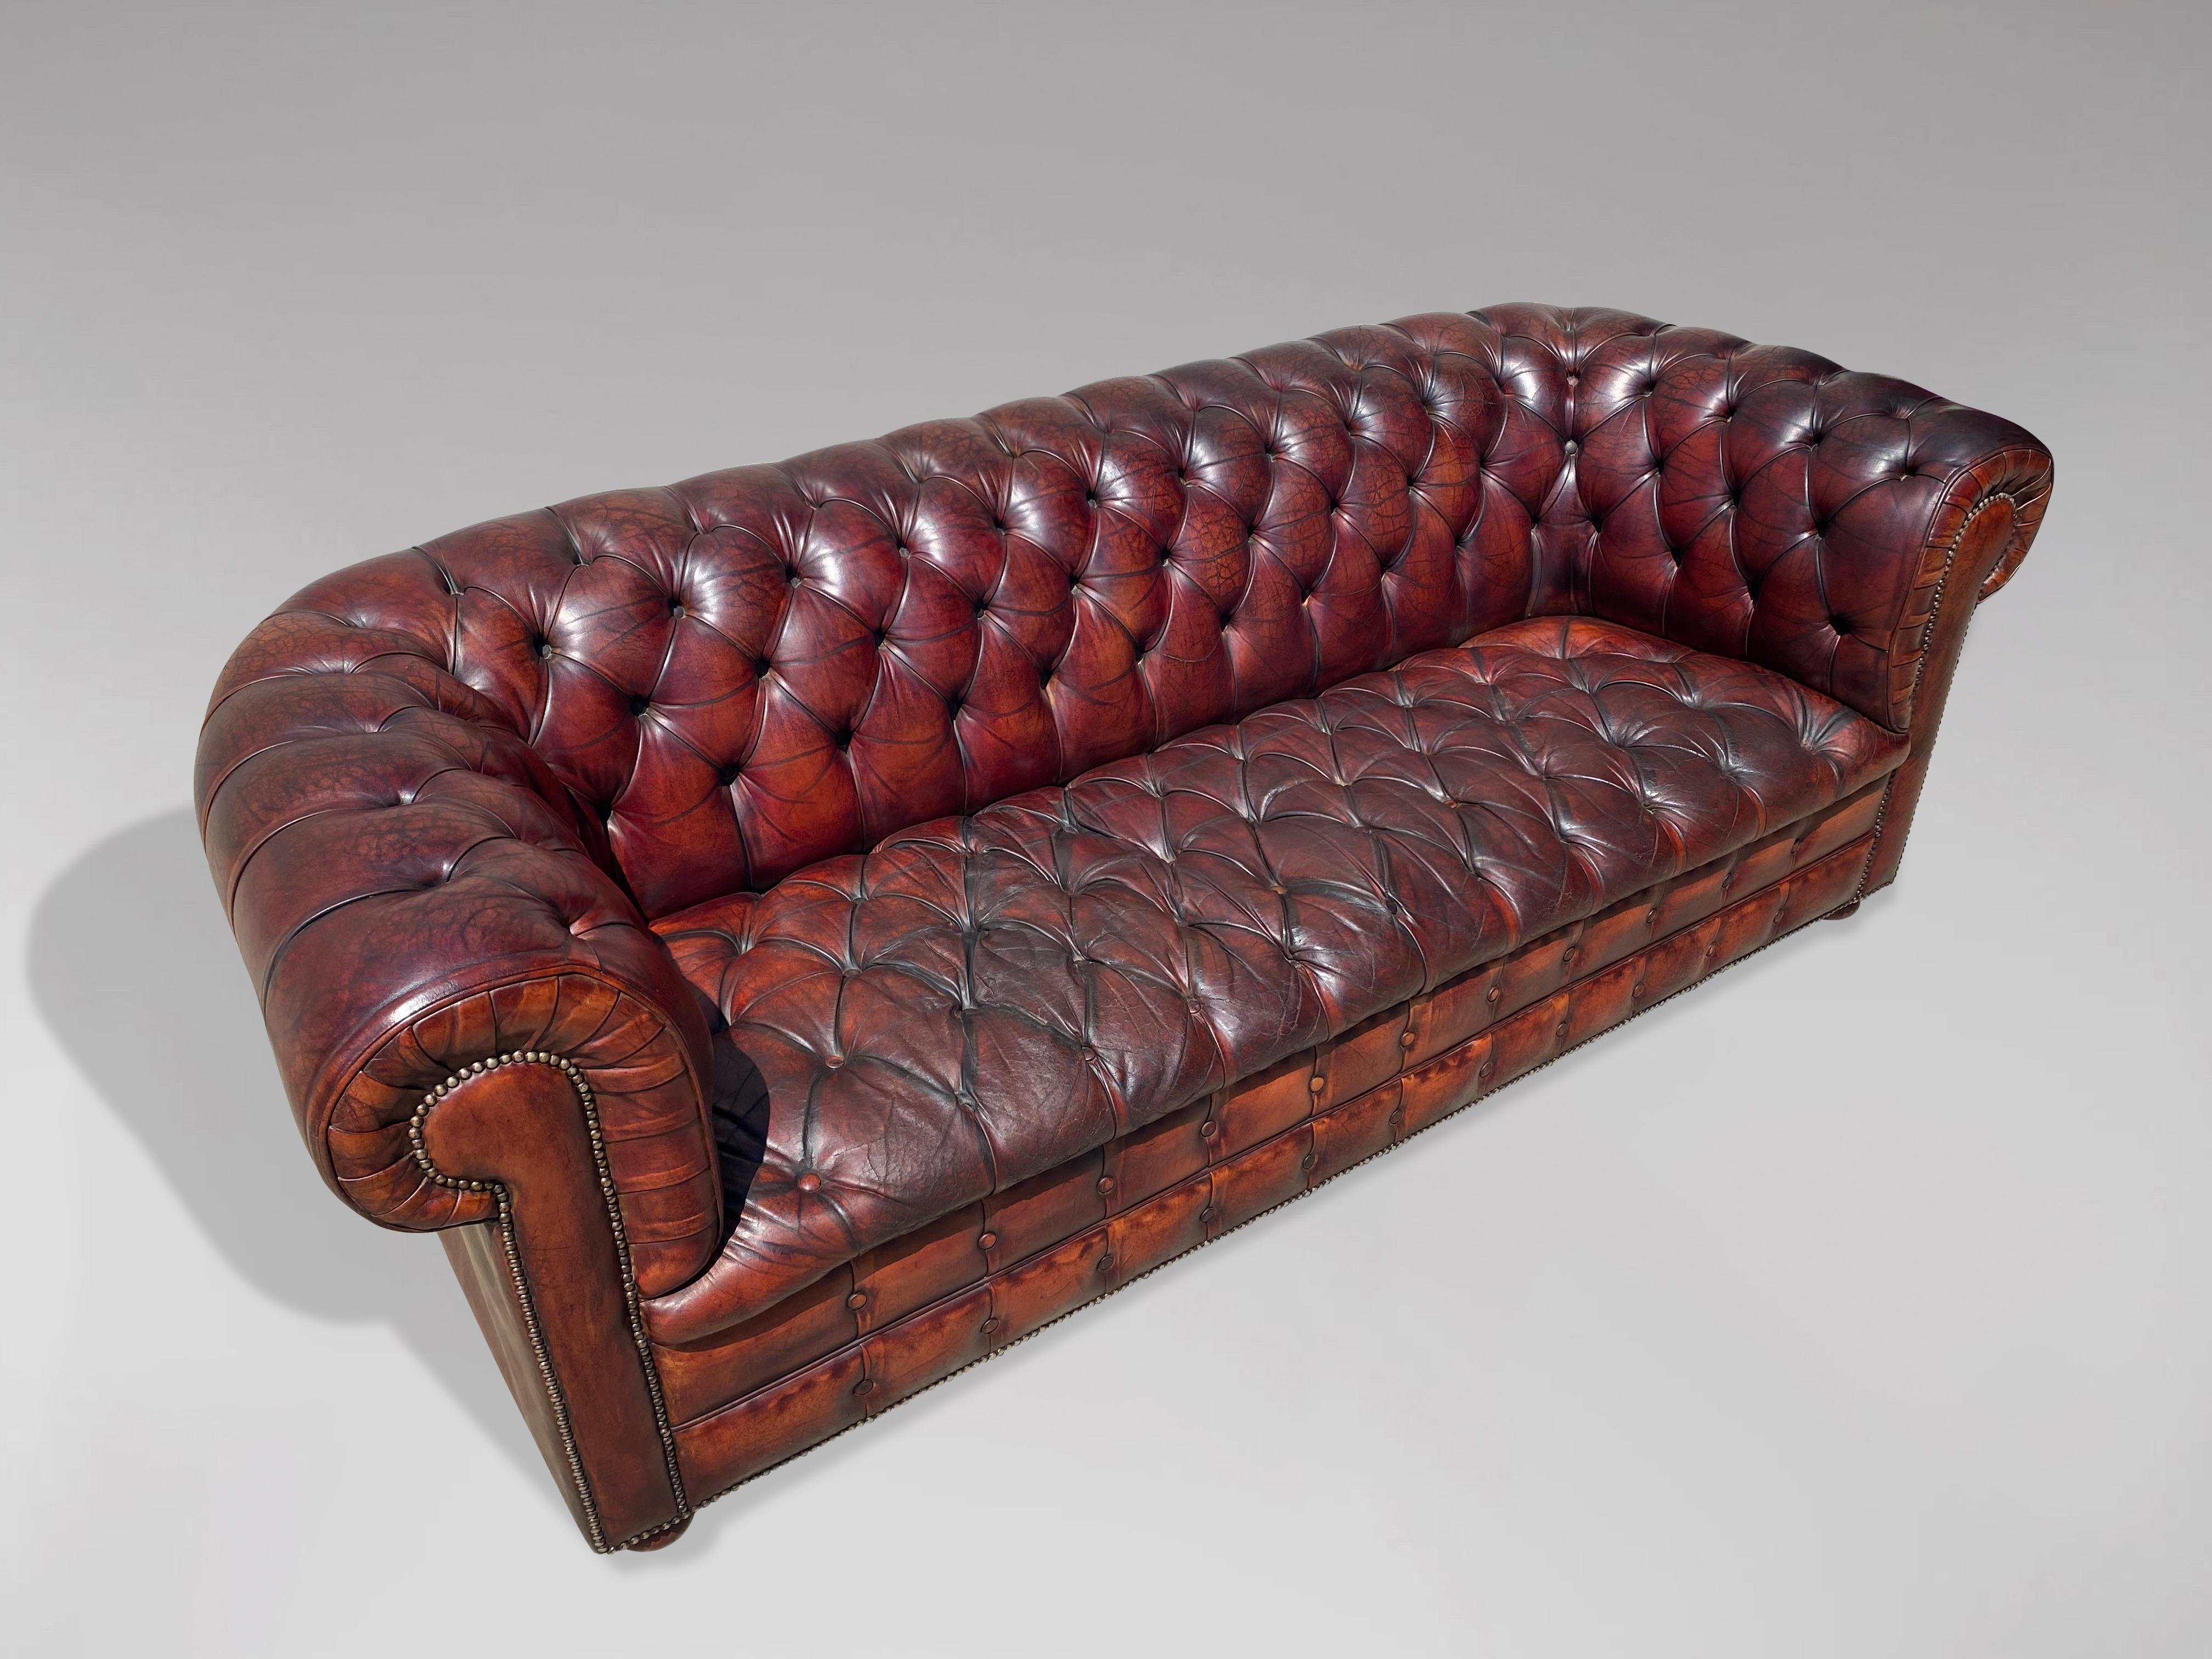 Early 20th Century Burgundy Colour Leather Three Seater Chesterfield In Good Condition For Sale In Petworth,West Sussex, GB